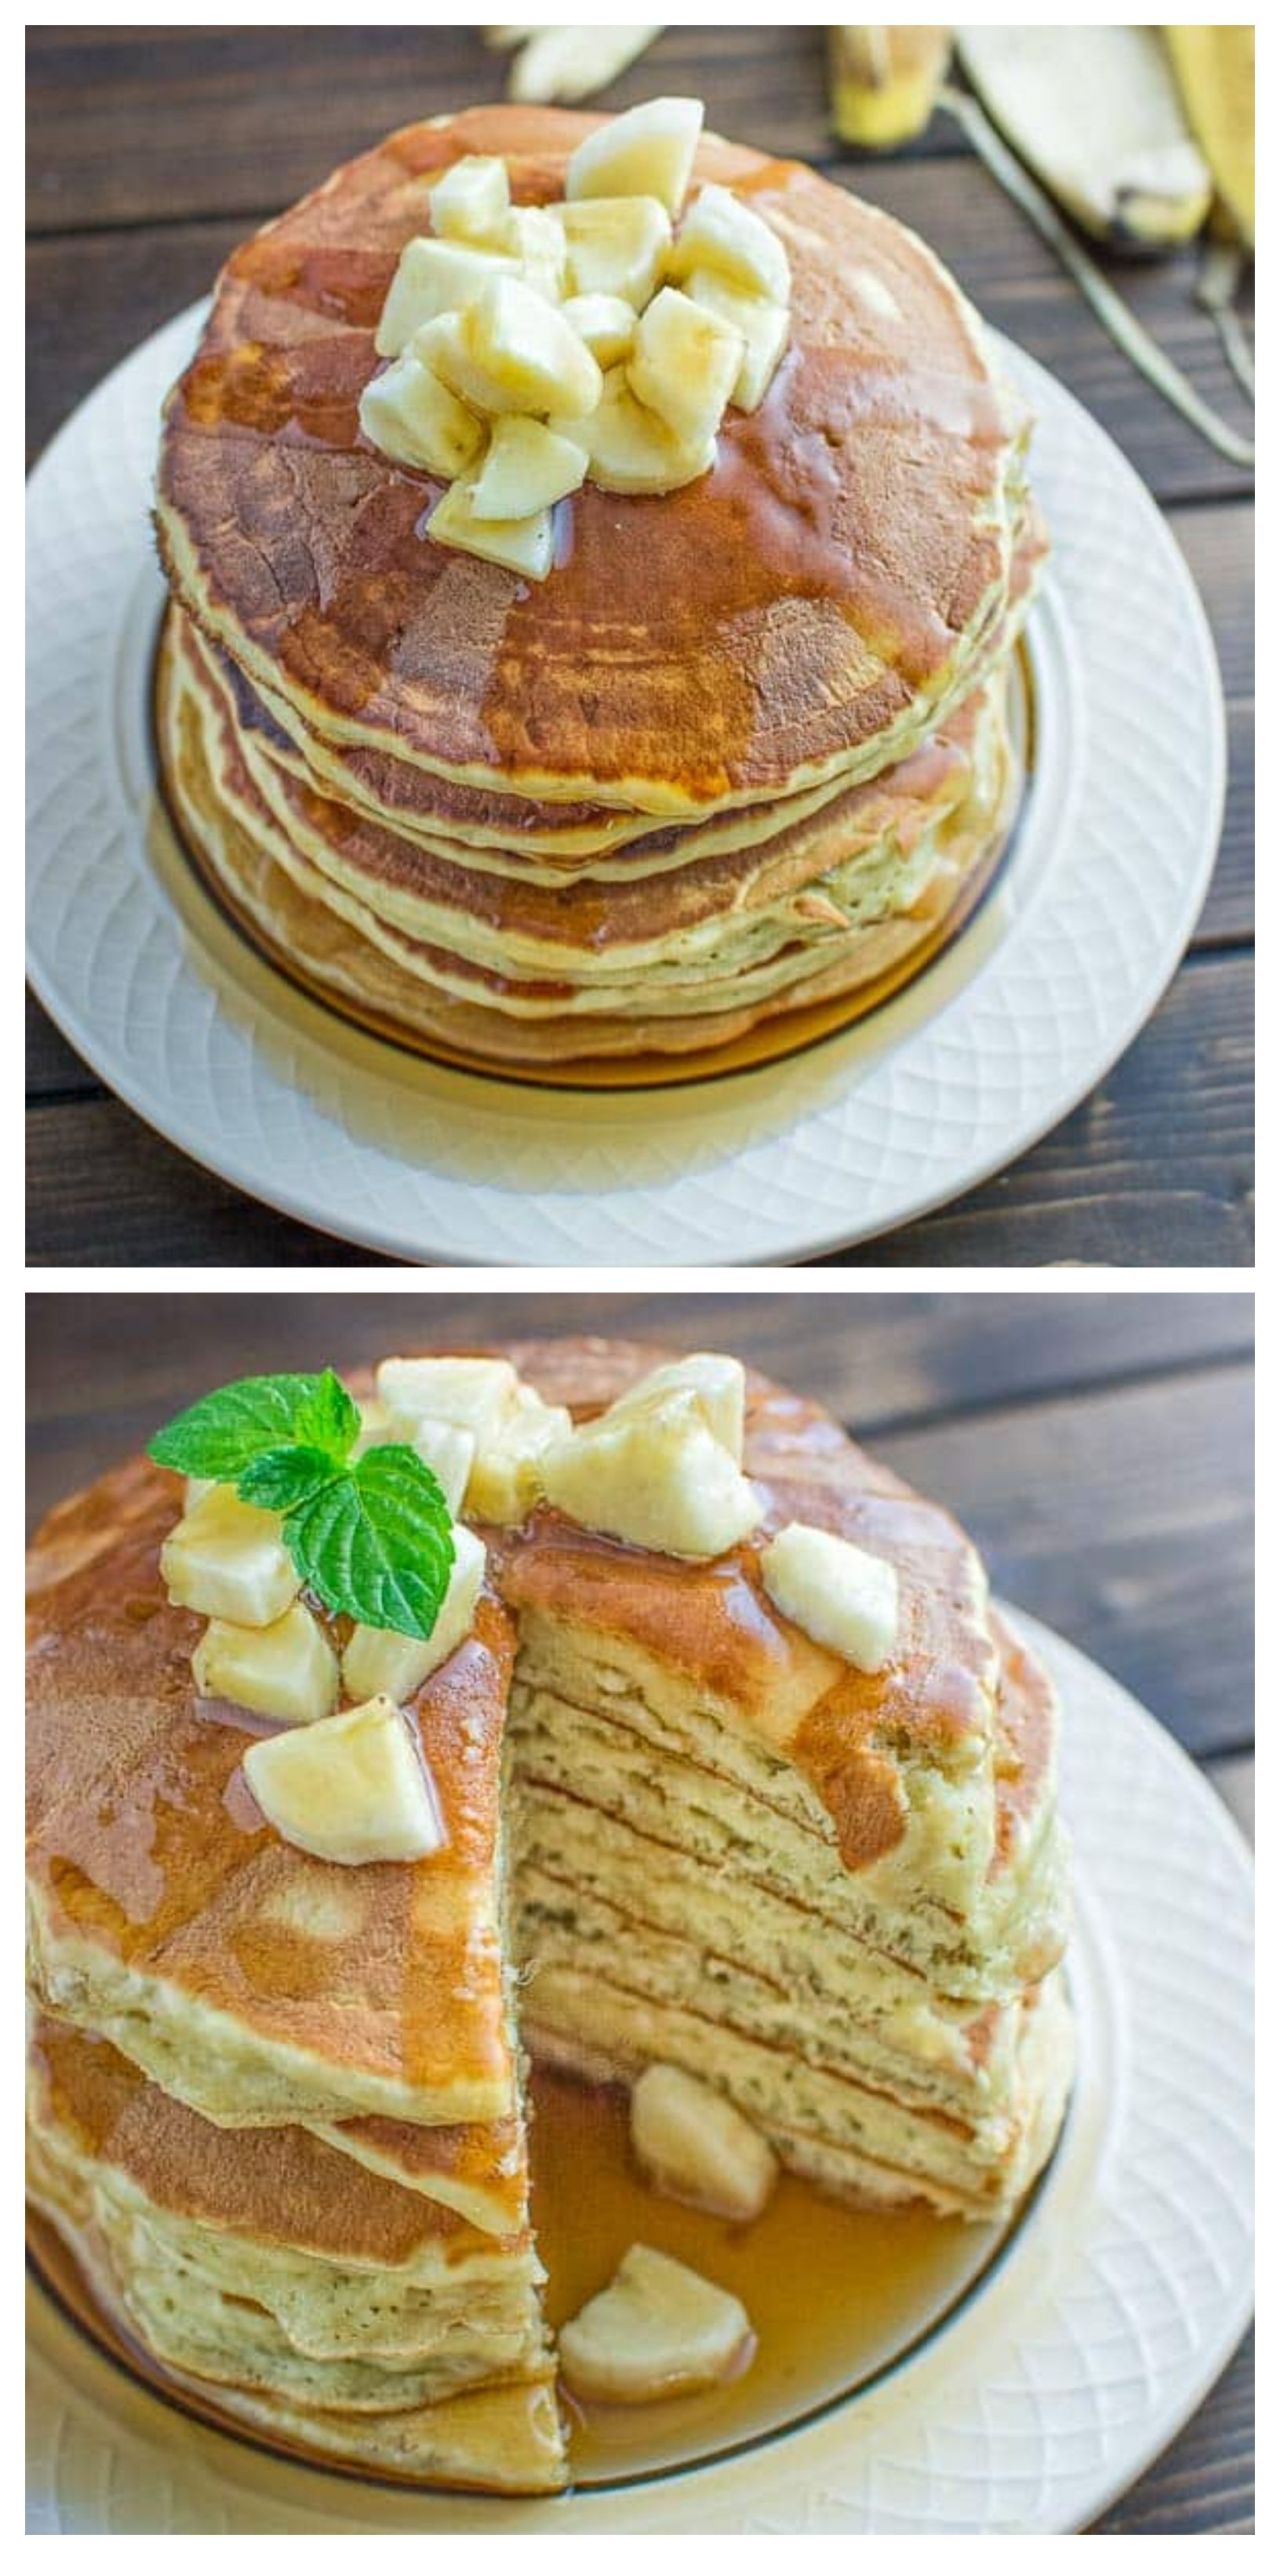 Healthy Pancakes From Scratch
 Banana Pancakes